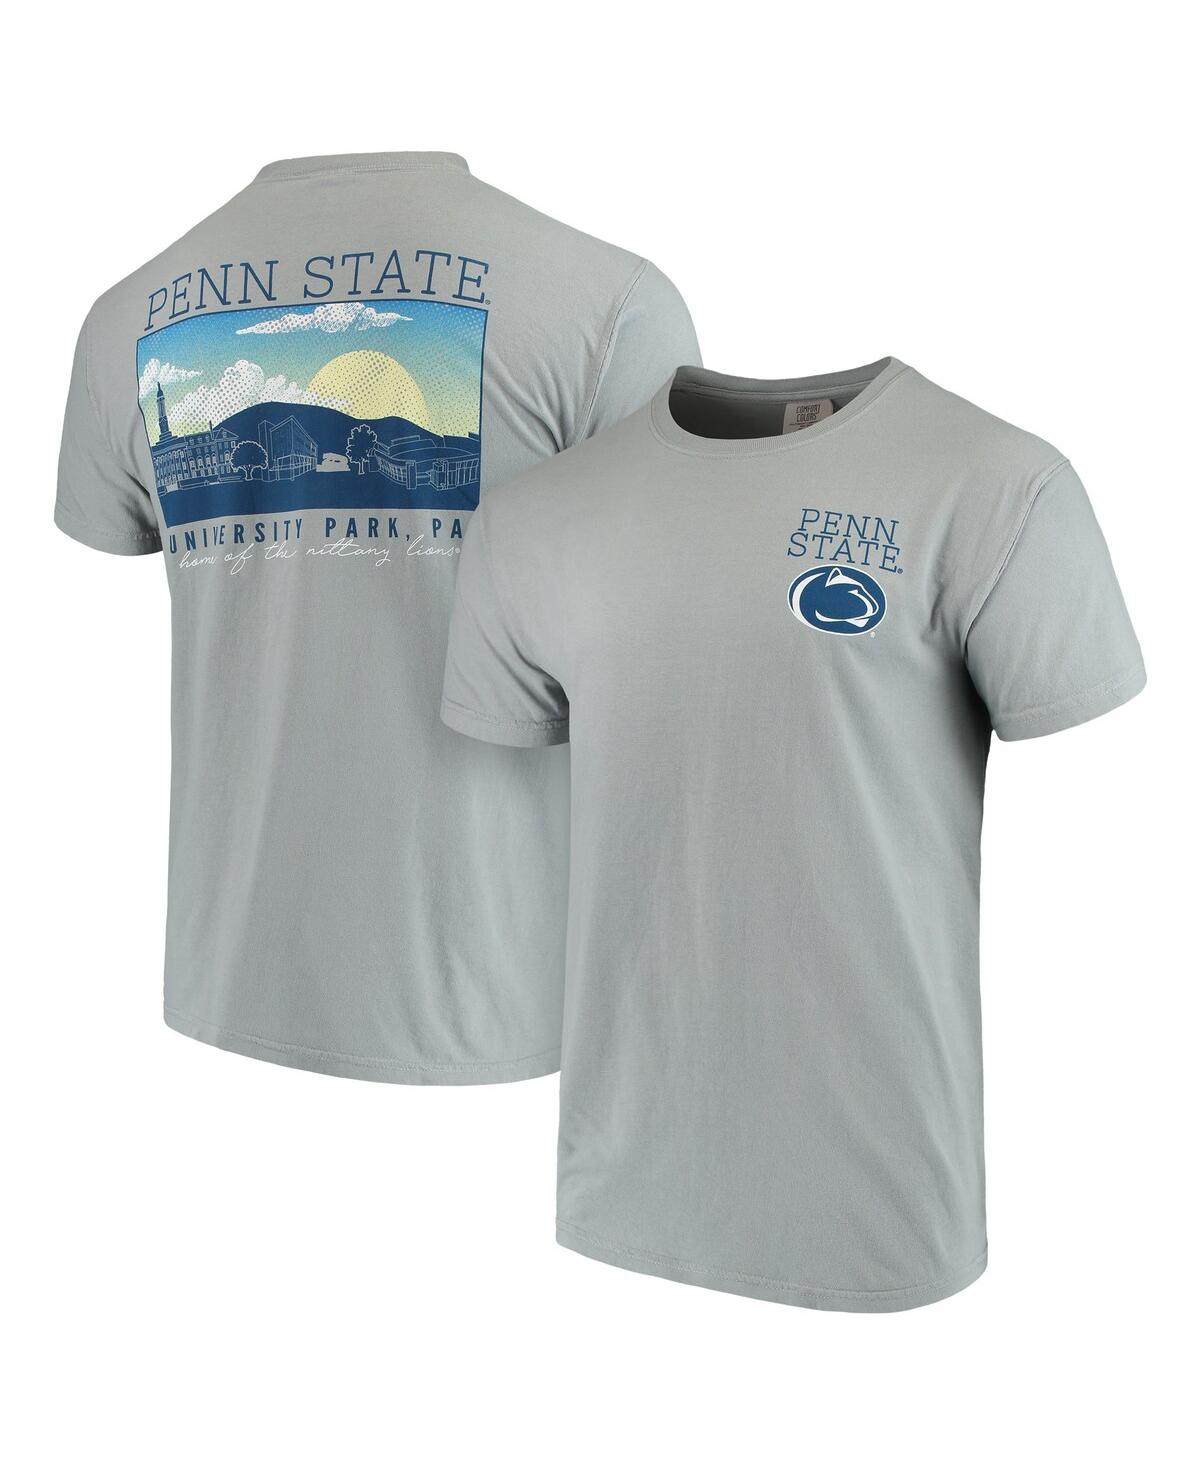 Men's Gray Penn State Nittany Lions Comfort Colors Campus Scenery T-shirt - Gray